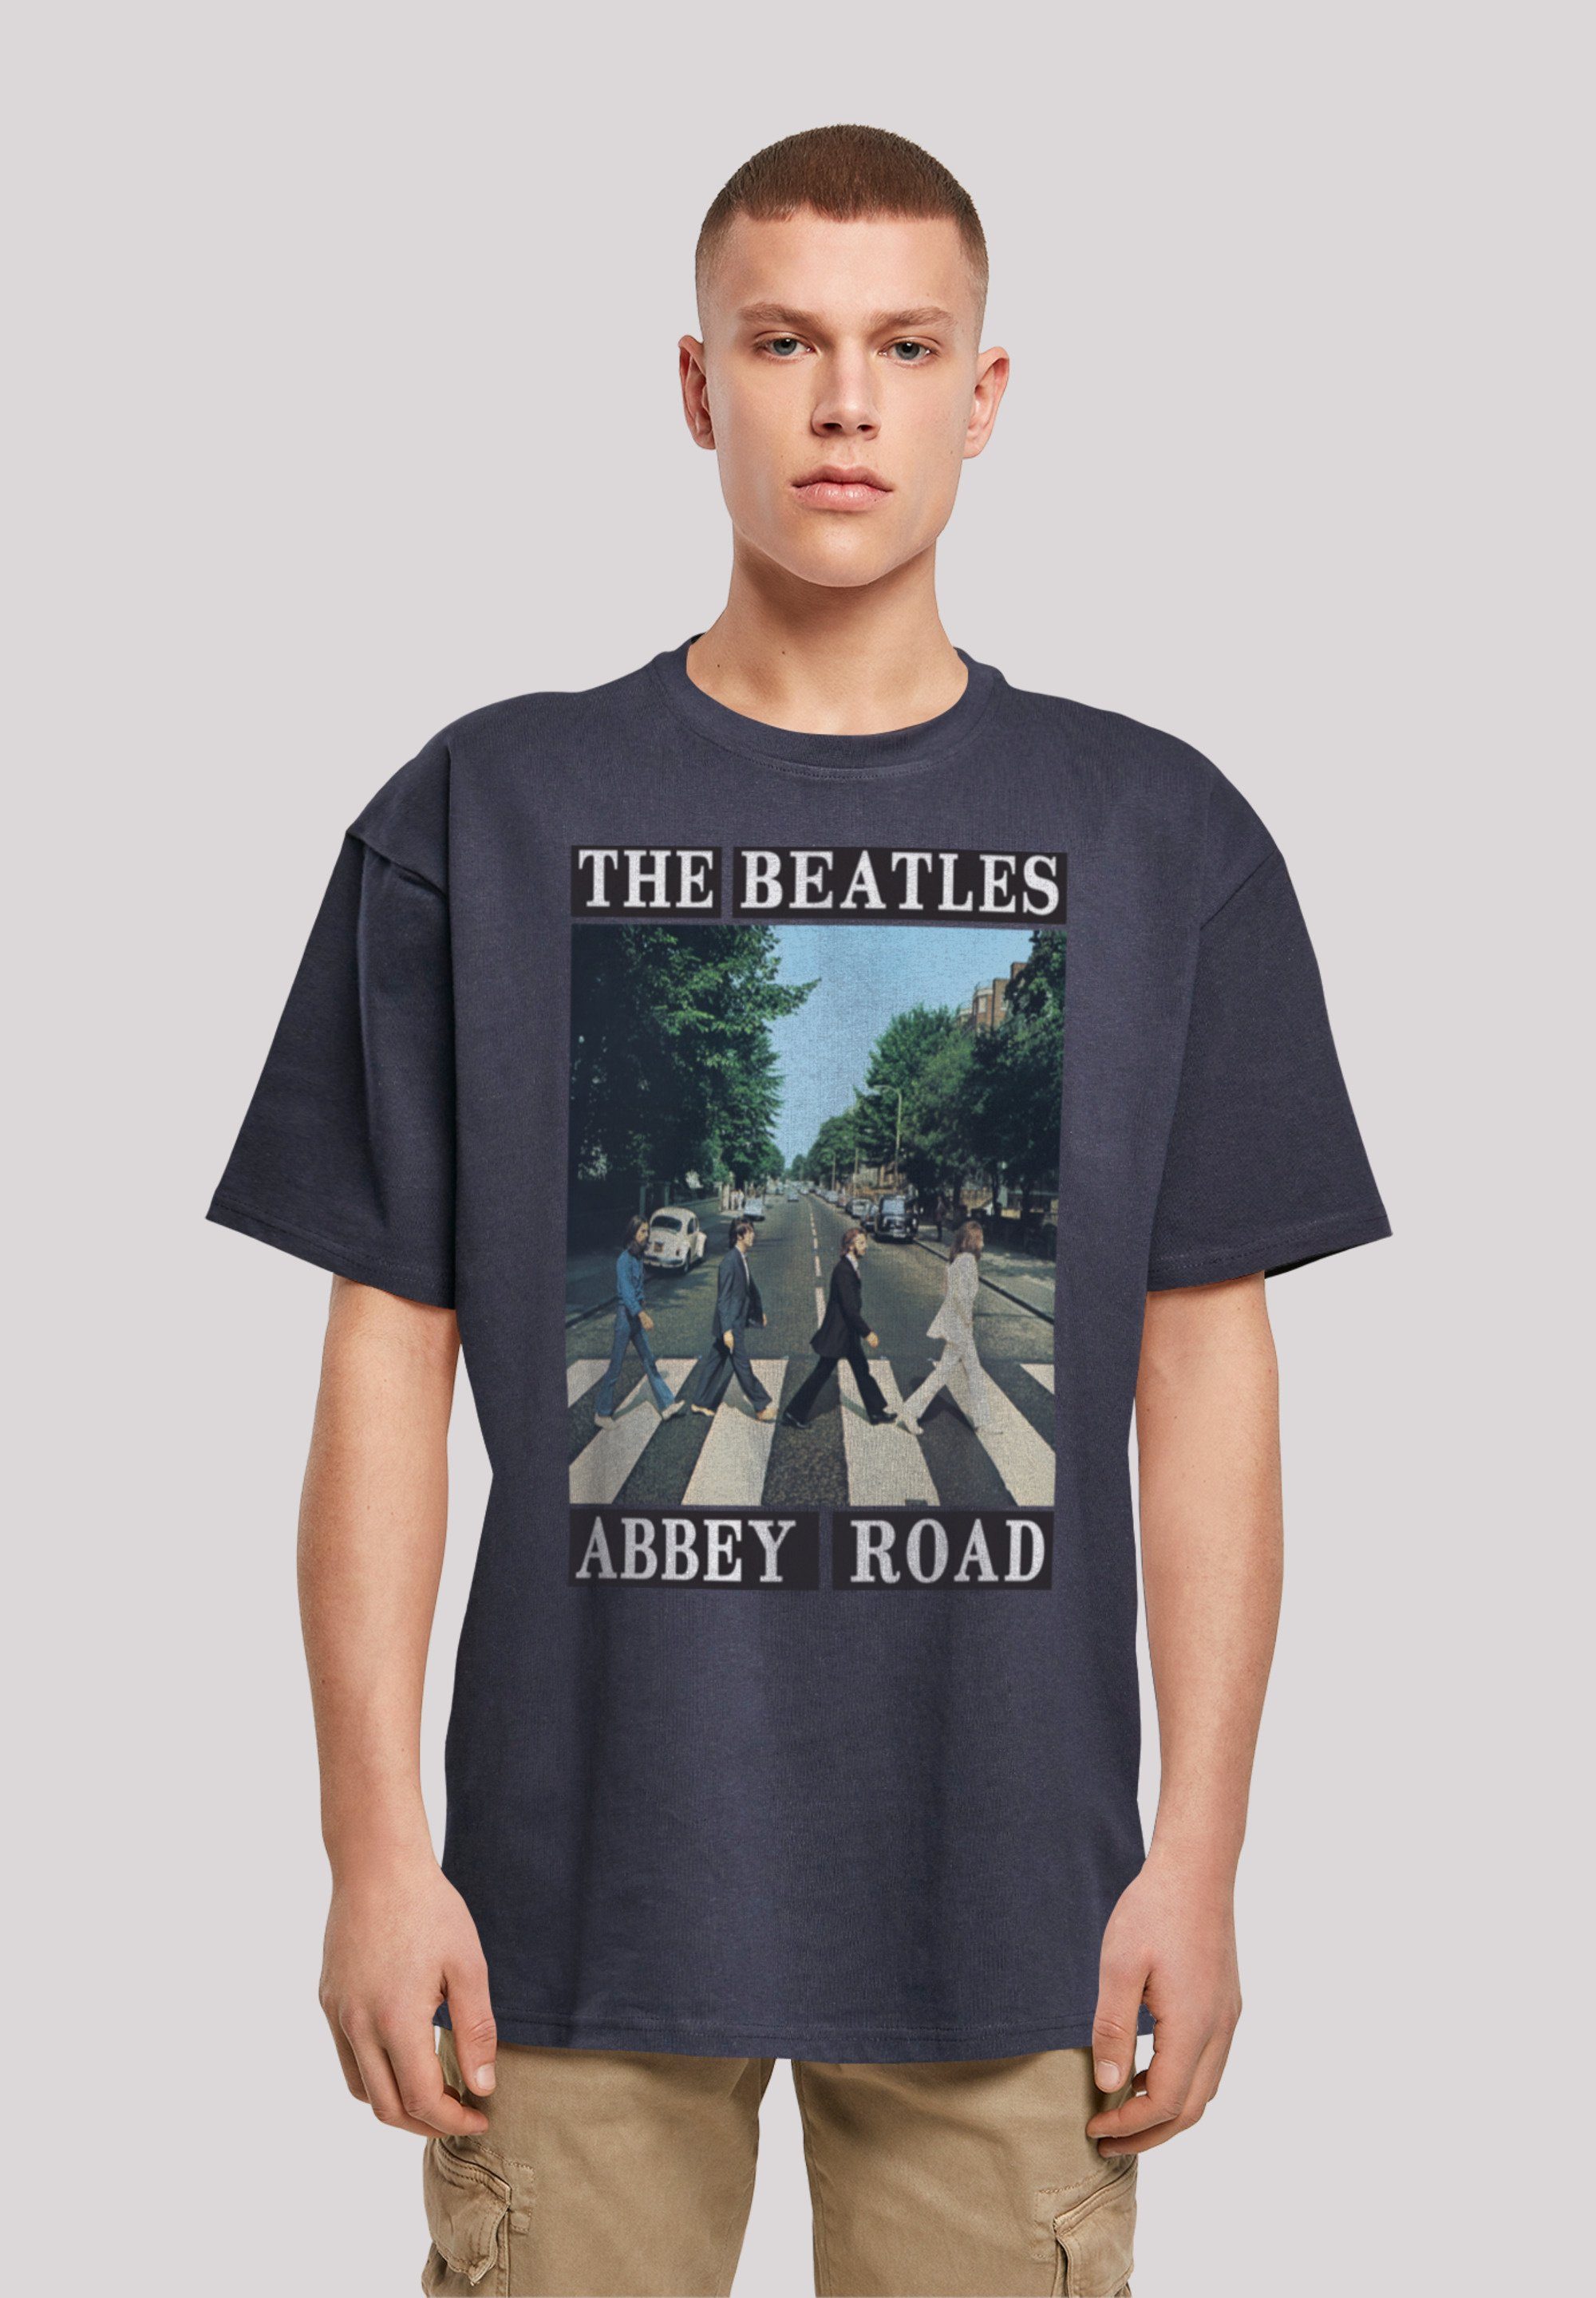 F4NT4STIC T-Shirt The Beatles Abbey navy Band Print Road